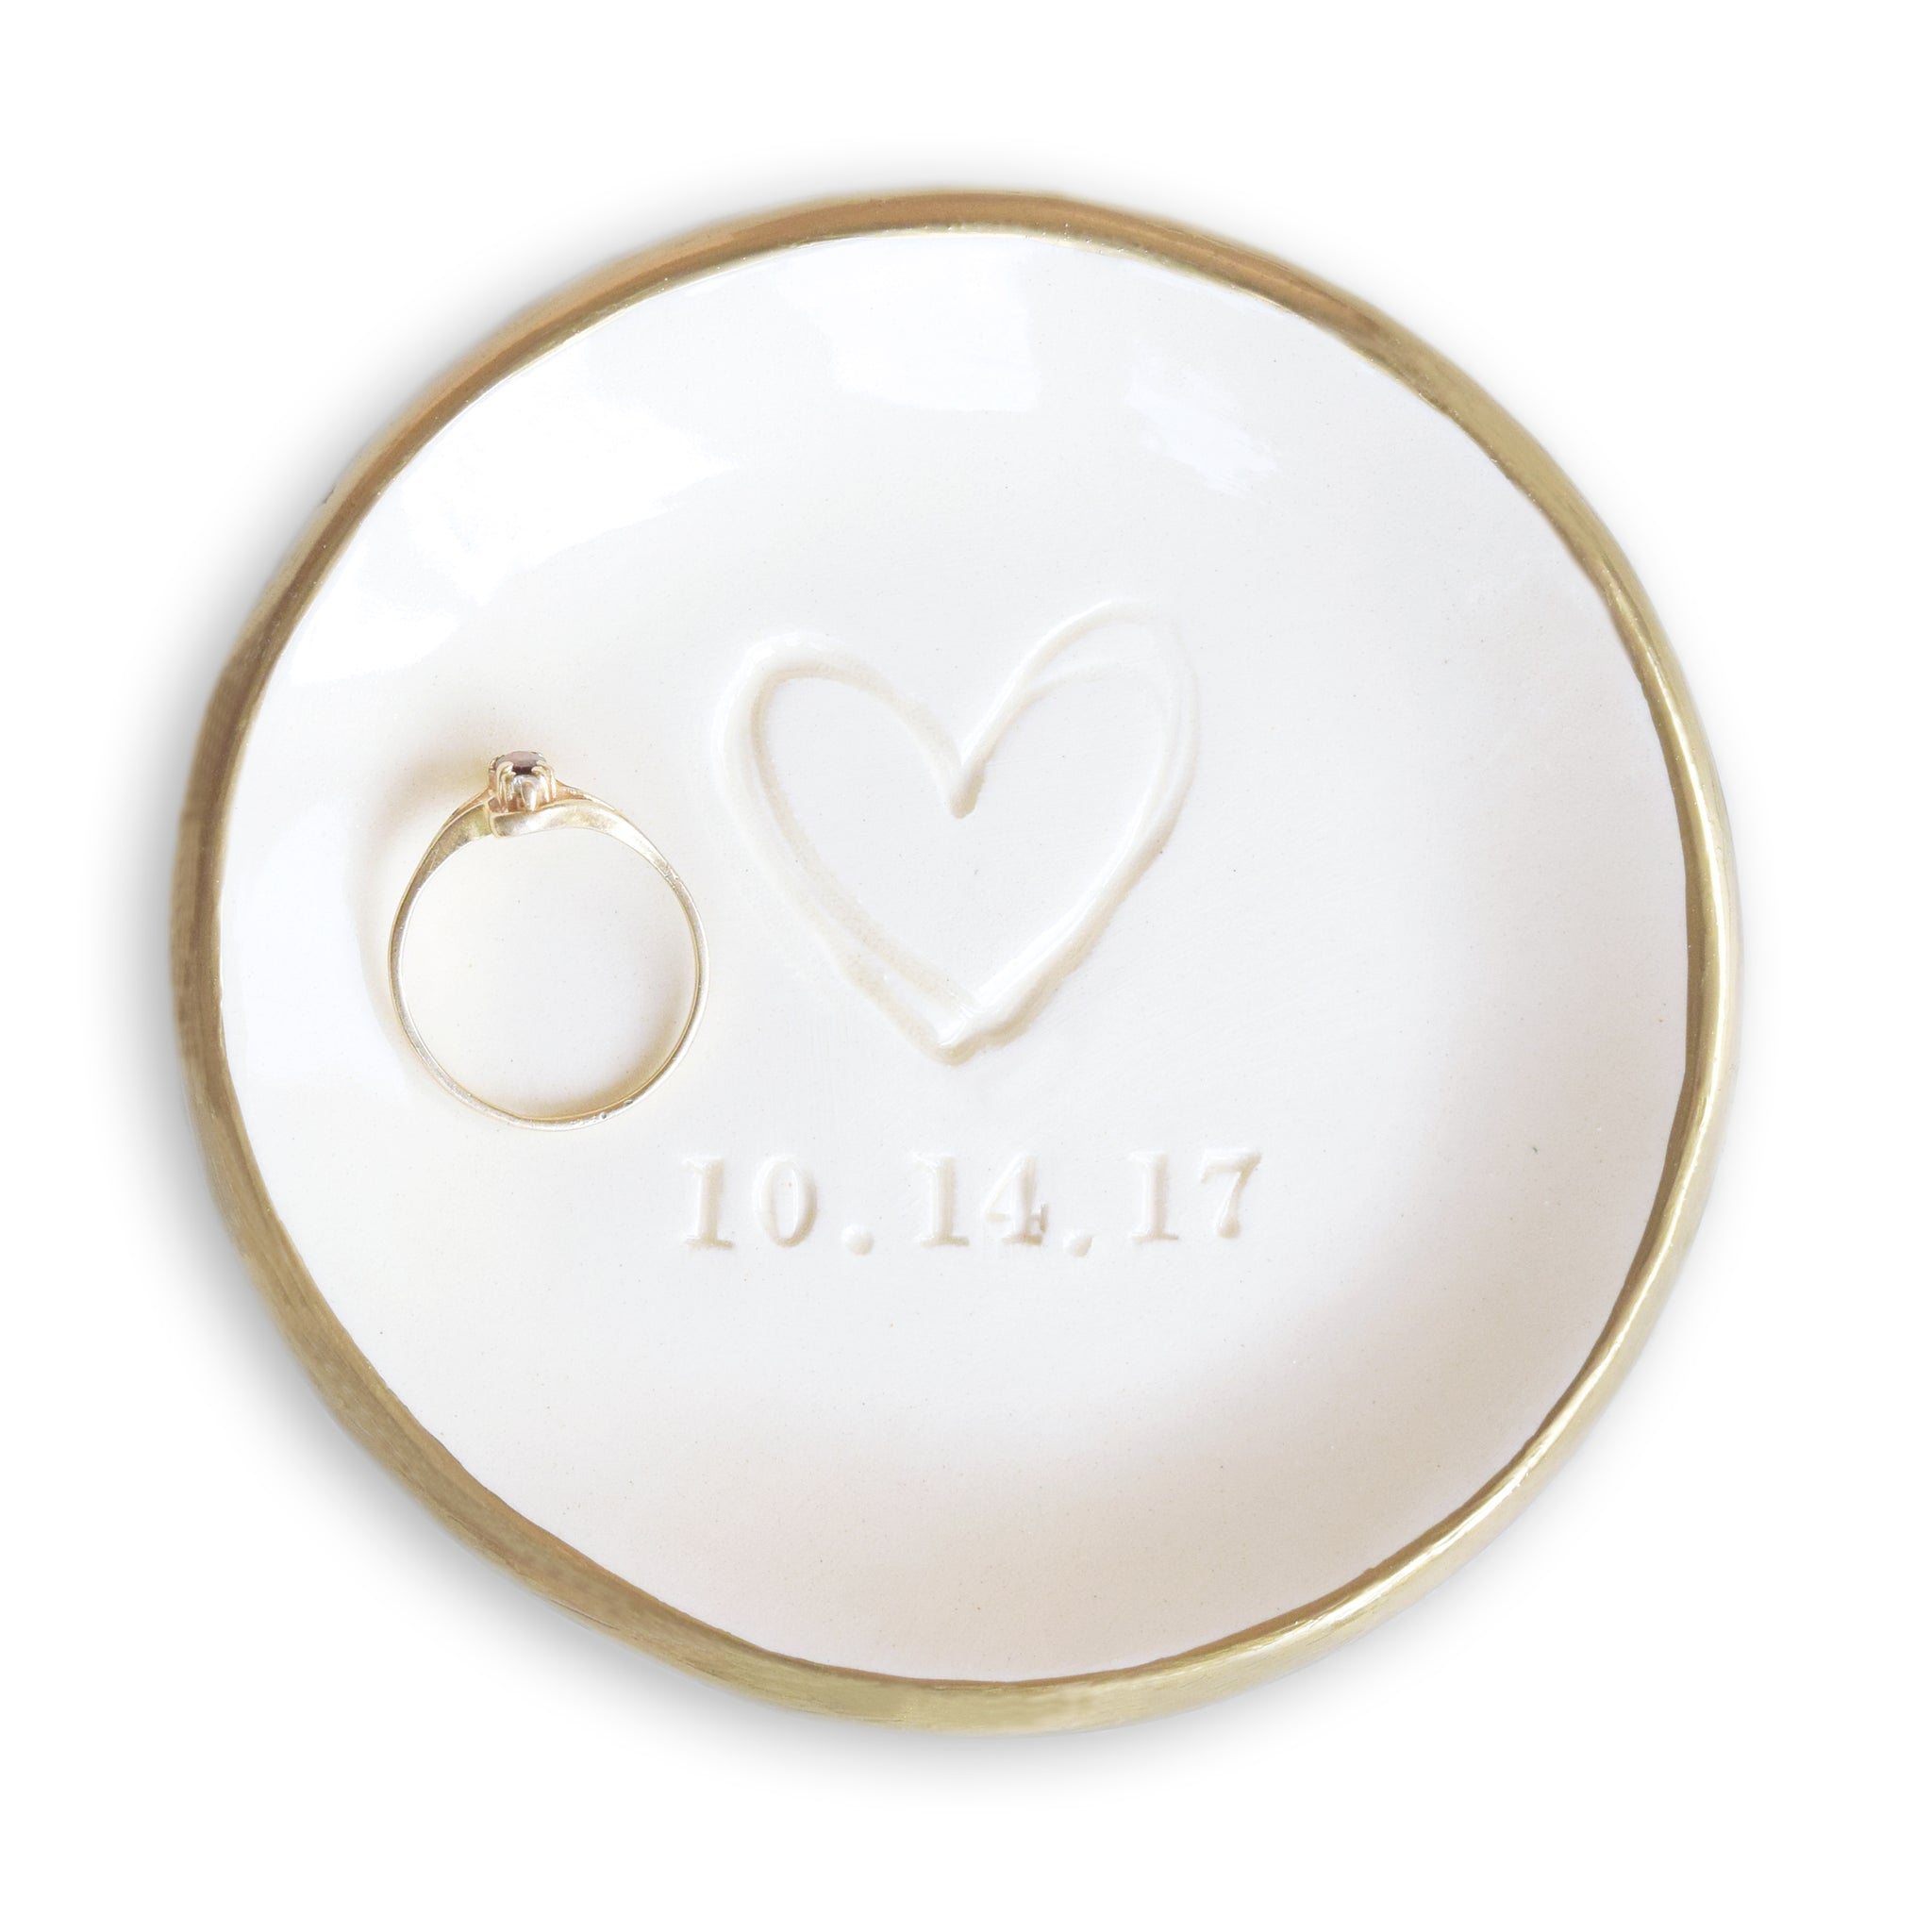 Elegant White & Gold Ring Dish for Newlyweds & Married Couples